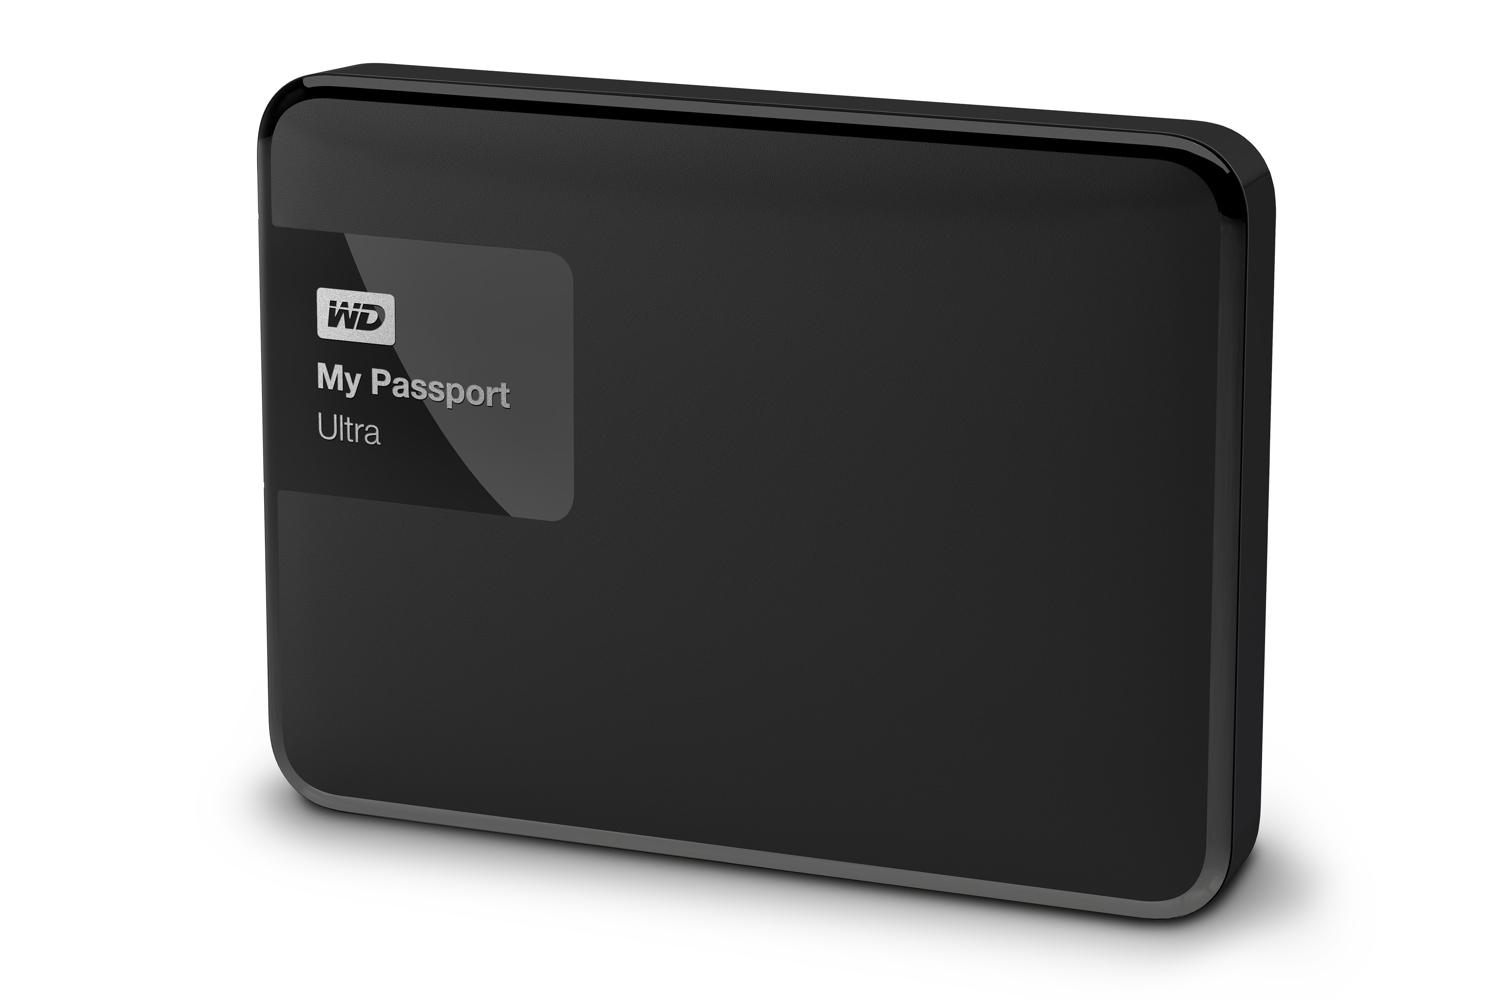 western digital raises portable my passport drive capacity to 3tb adds new colors wd mypassport ultra classic black may2015 6